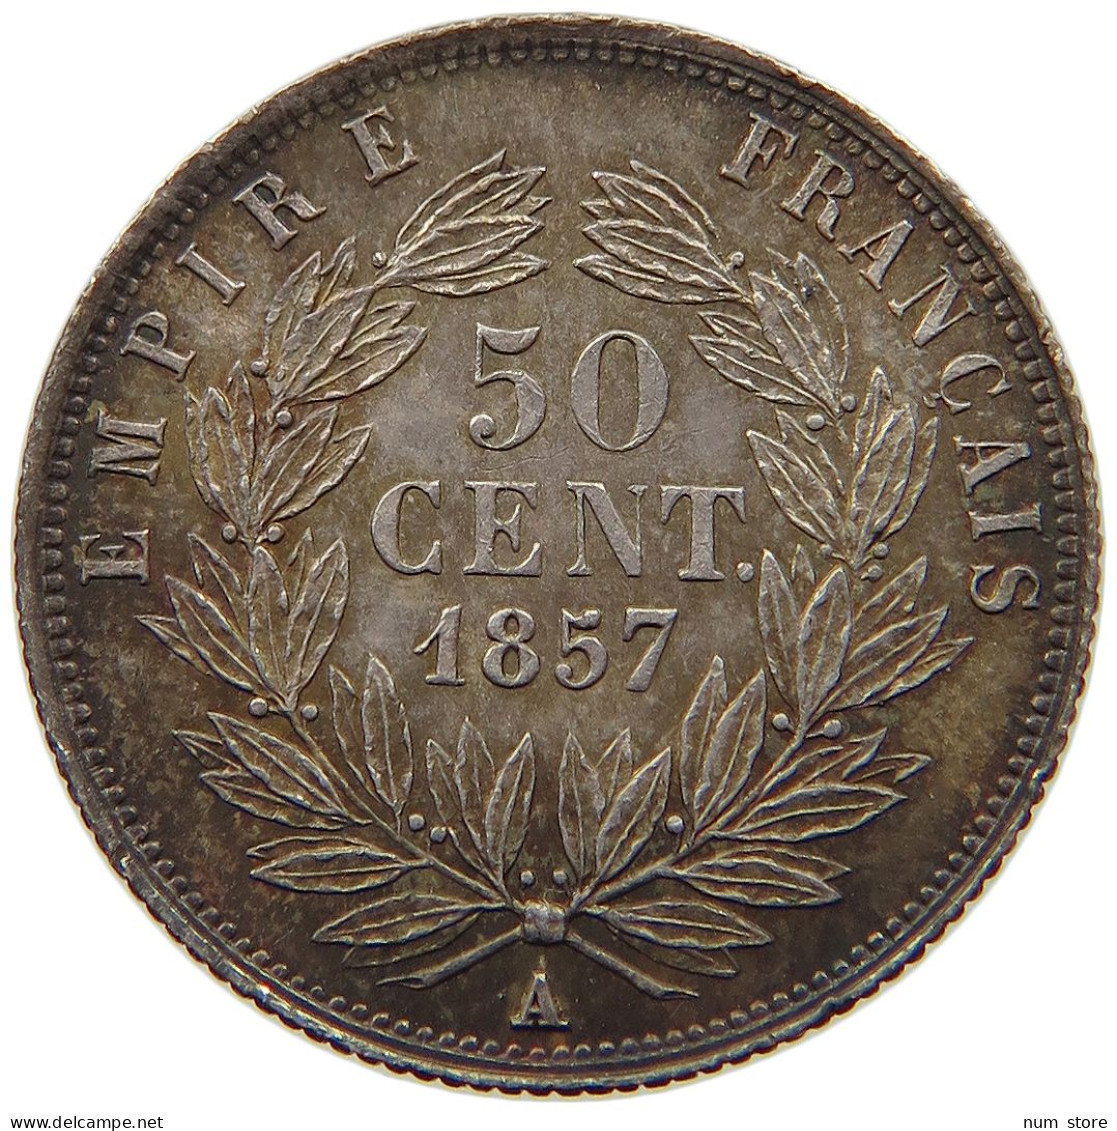 FRANCE 50 CENTIMES 1857 A Napoleon III. (1852-1870) #t058 0237 - 50 Centimes